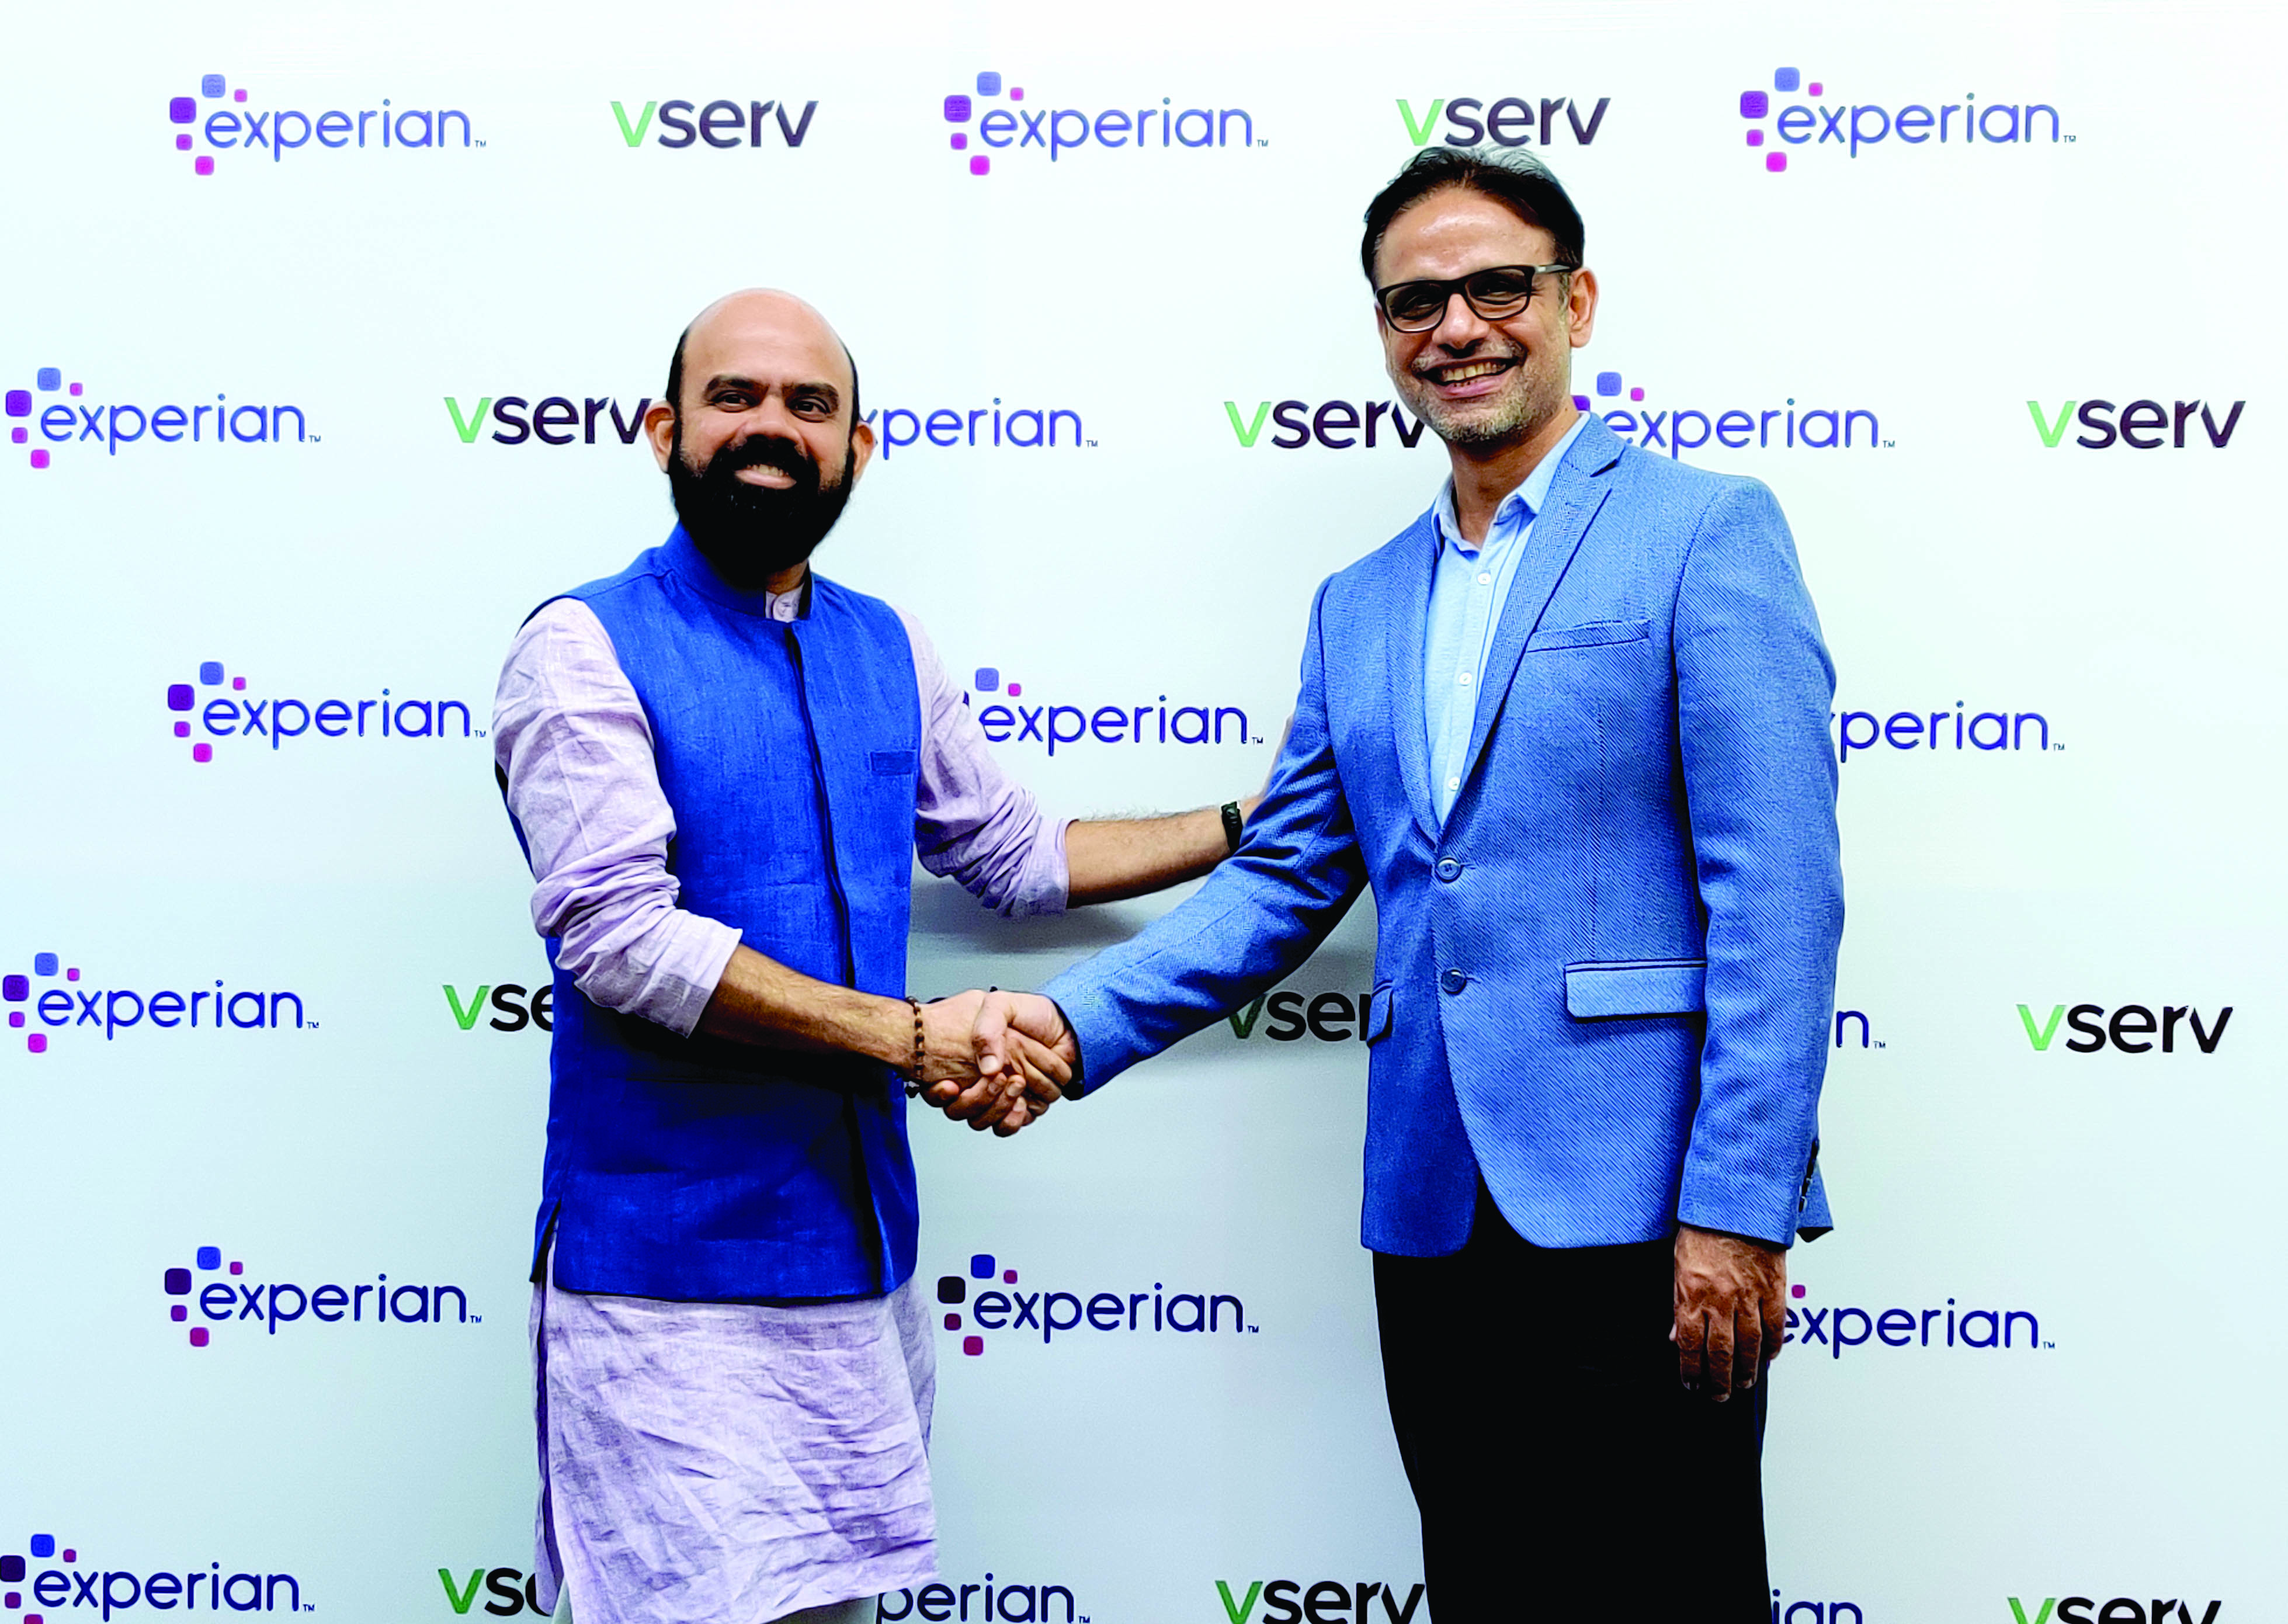 Experian invests in Vserv to enable friction-free digital experience of BFSI sector